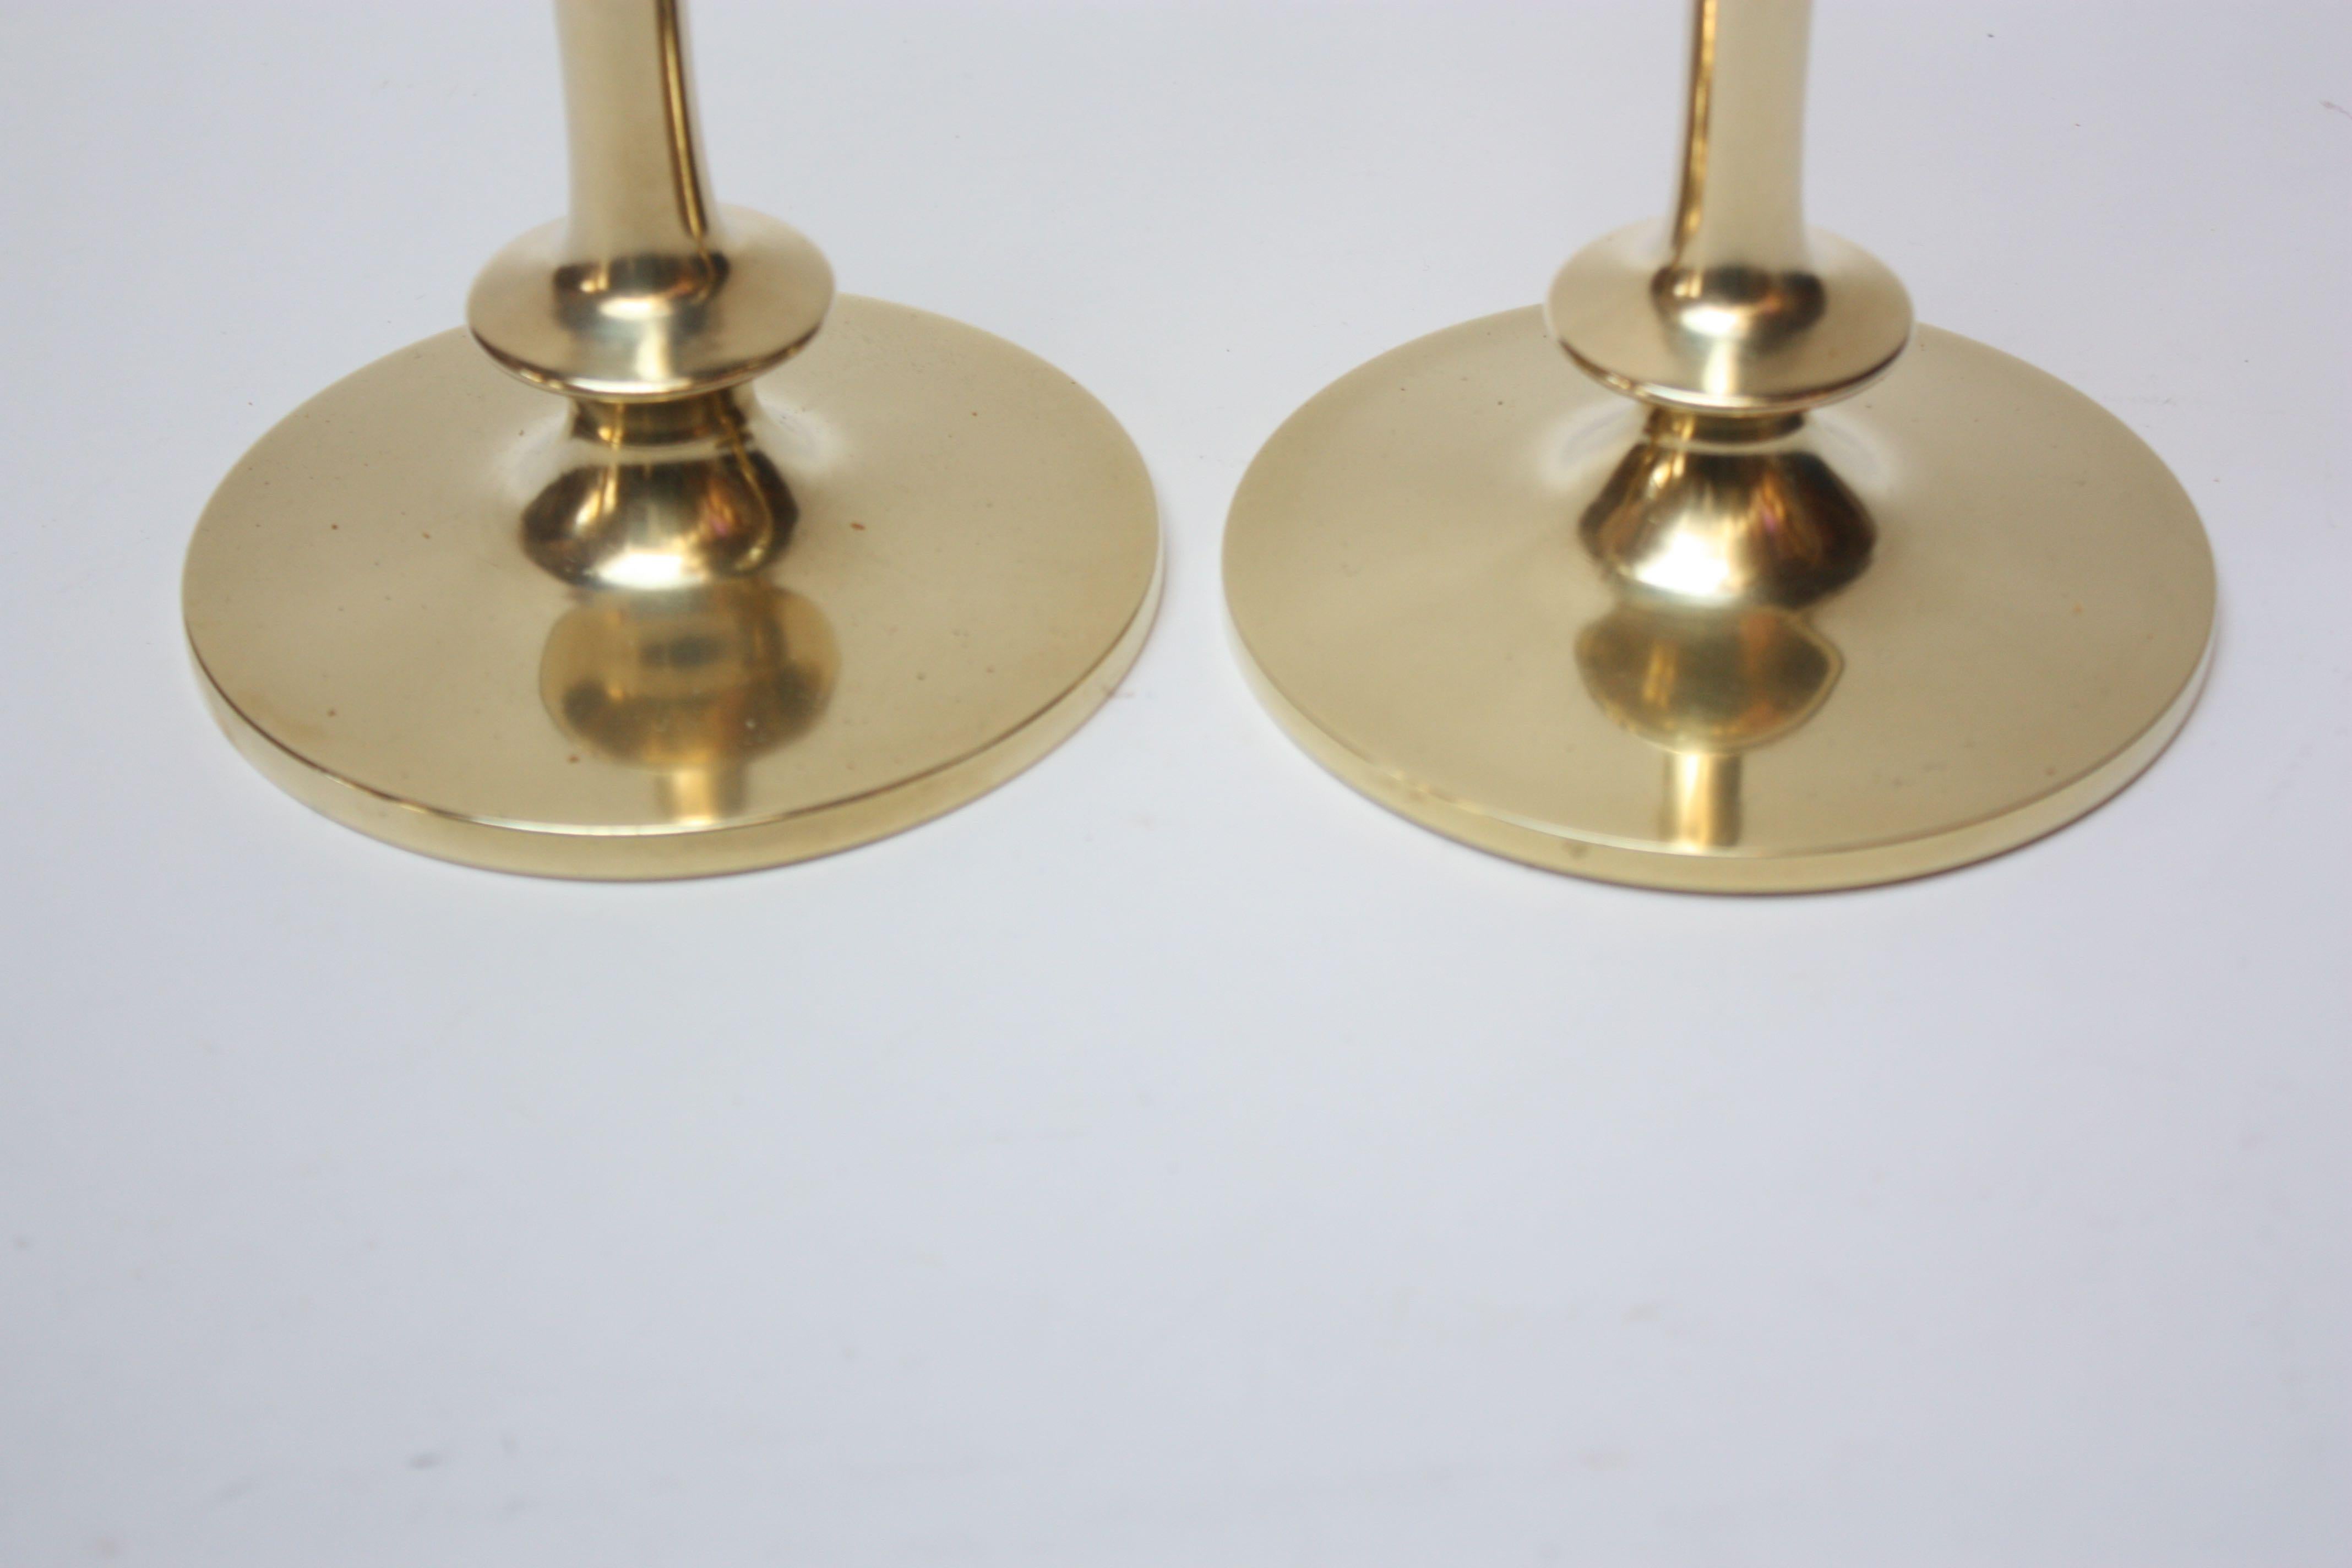 Pair of Mid-Century Modern Turned Brass Candlesticks after Jarvie 3